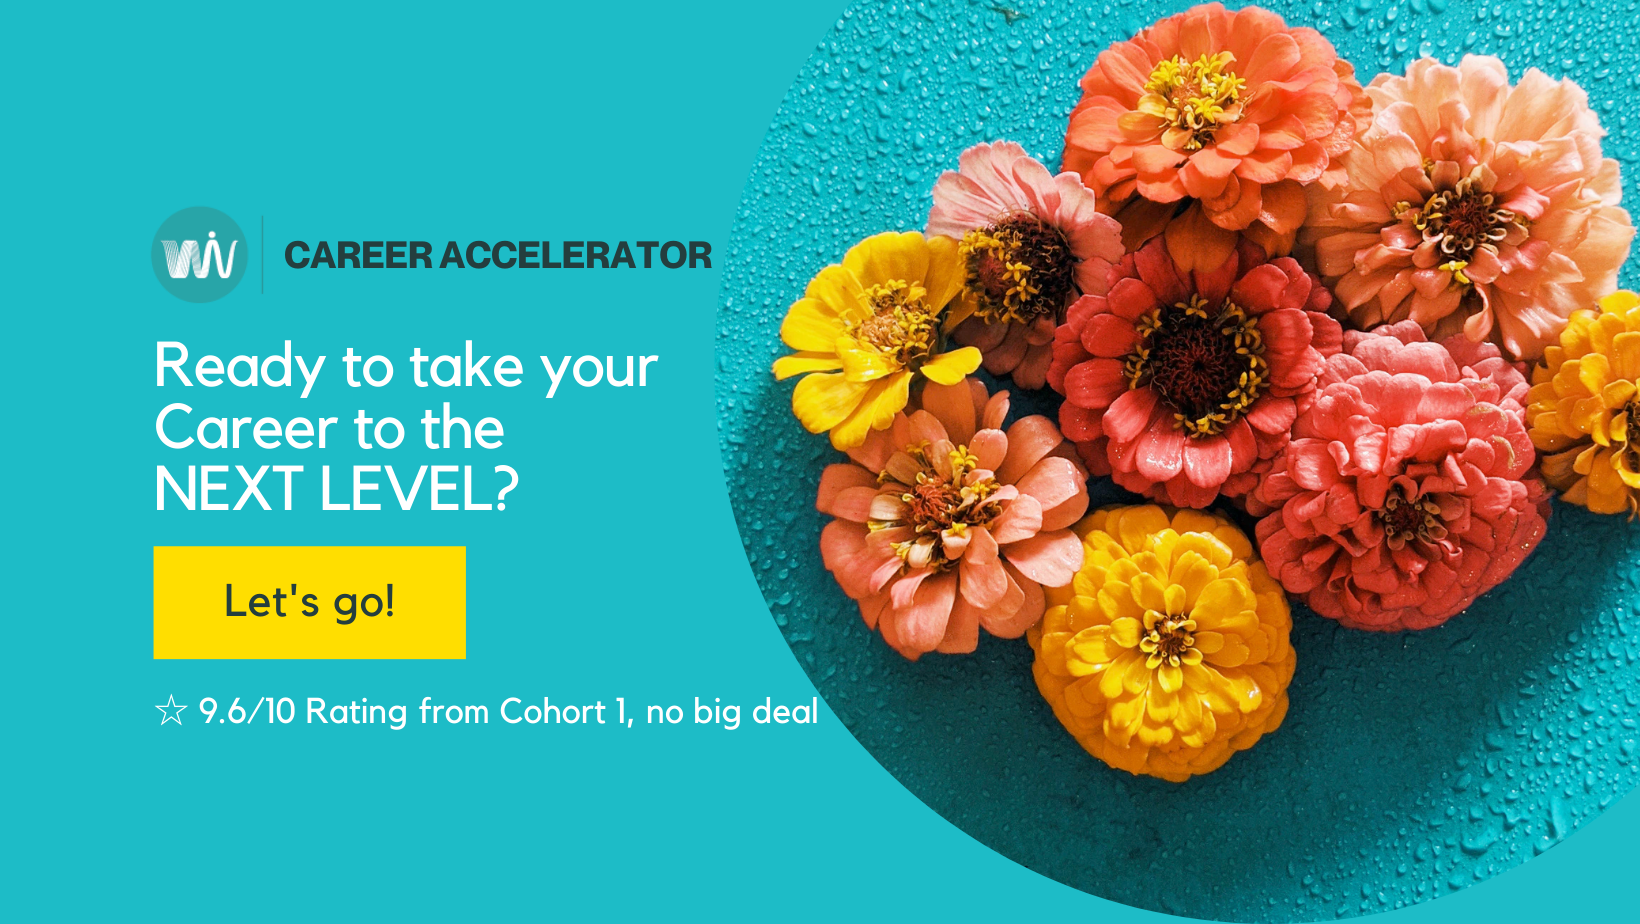 WiV Career Accelerator: Ready to take your career to the NEXT LEVEL? 9.6/10 rating from Cohort 1!